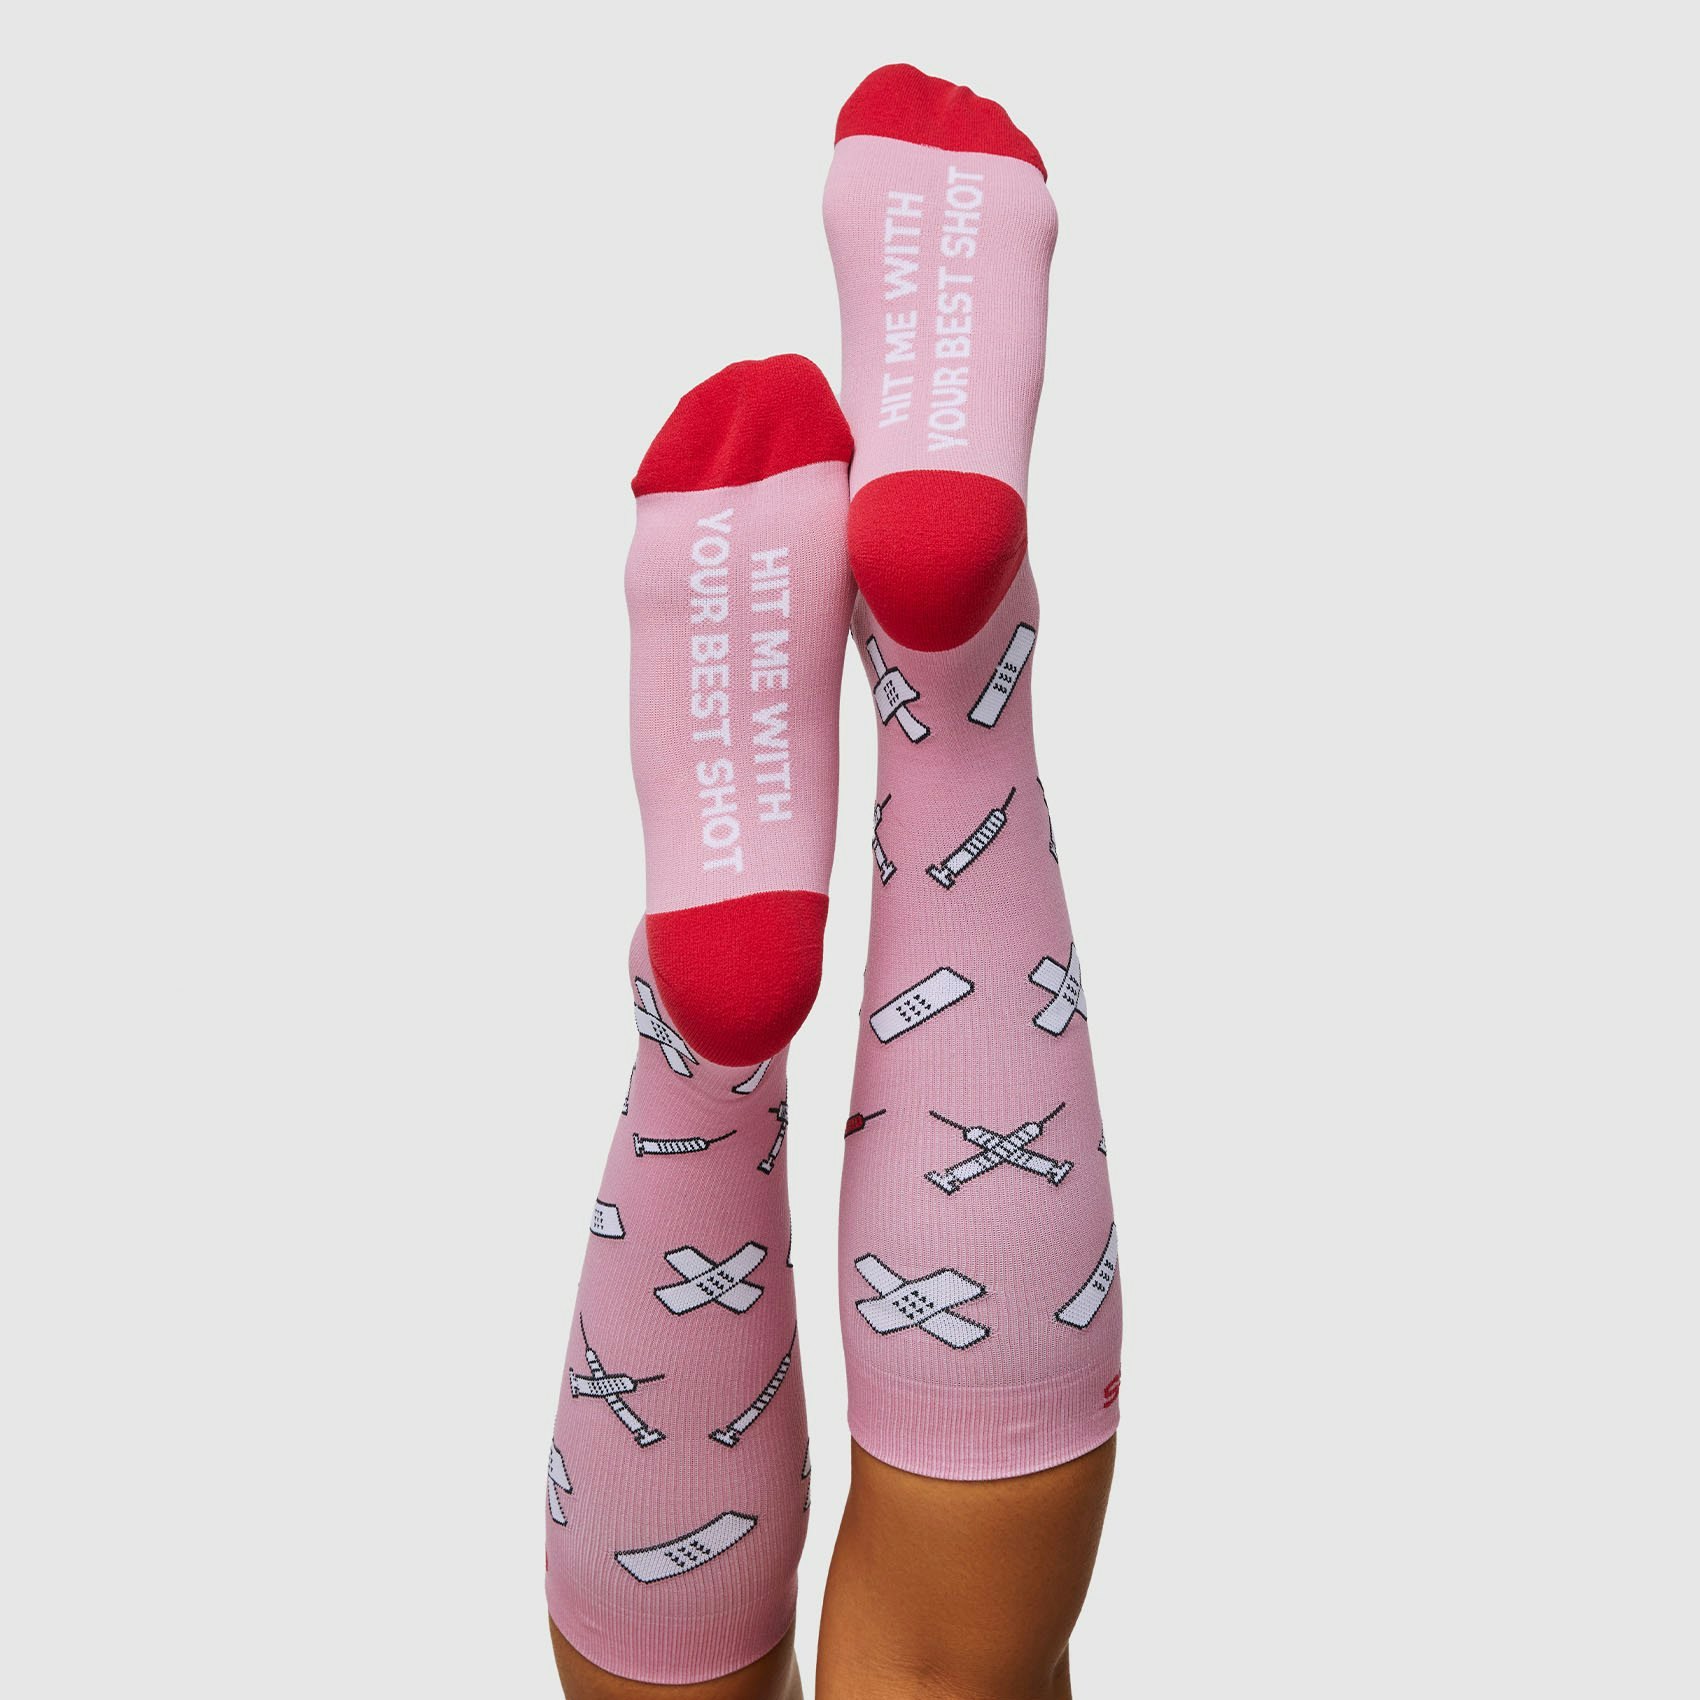 The Best (And Cutest) Compression Socks That Help Prevent